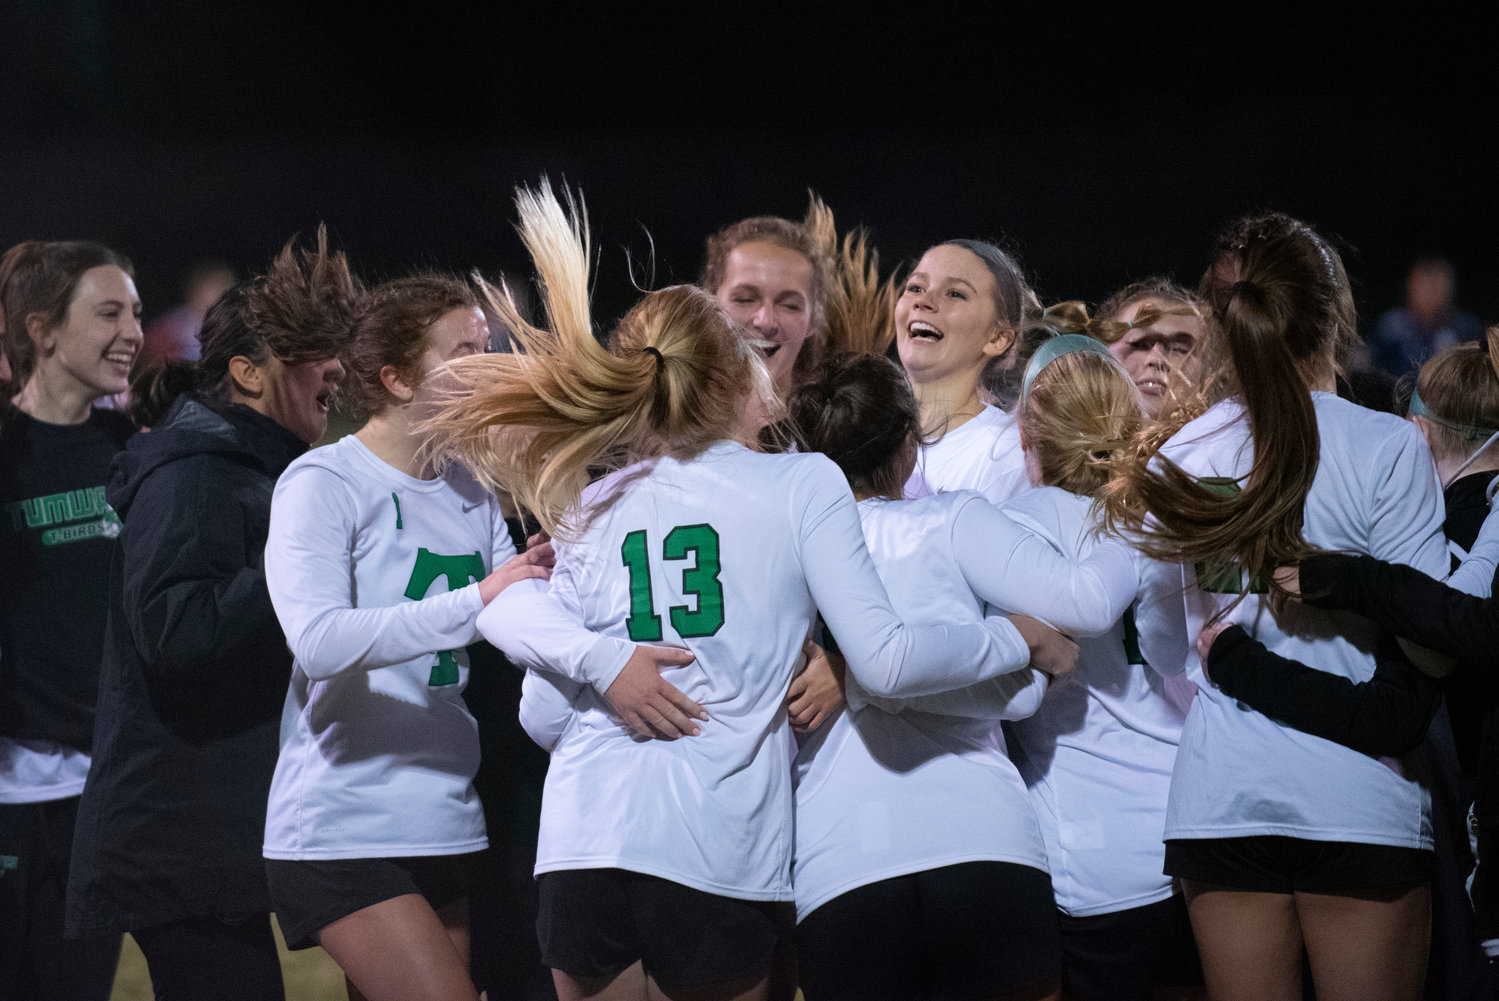 Tumwater girls soccer team celebrates after defeating Selah 3-2 in a 2A state opener Wednesday in Selah.